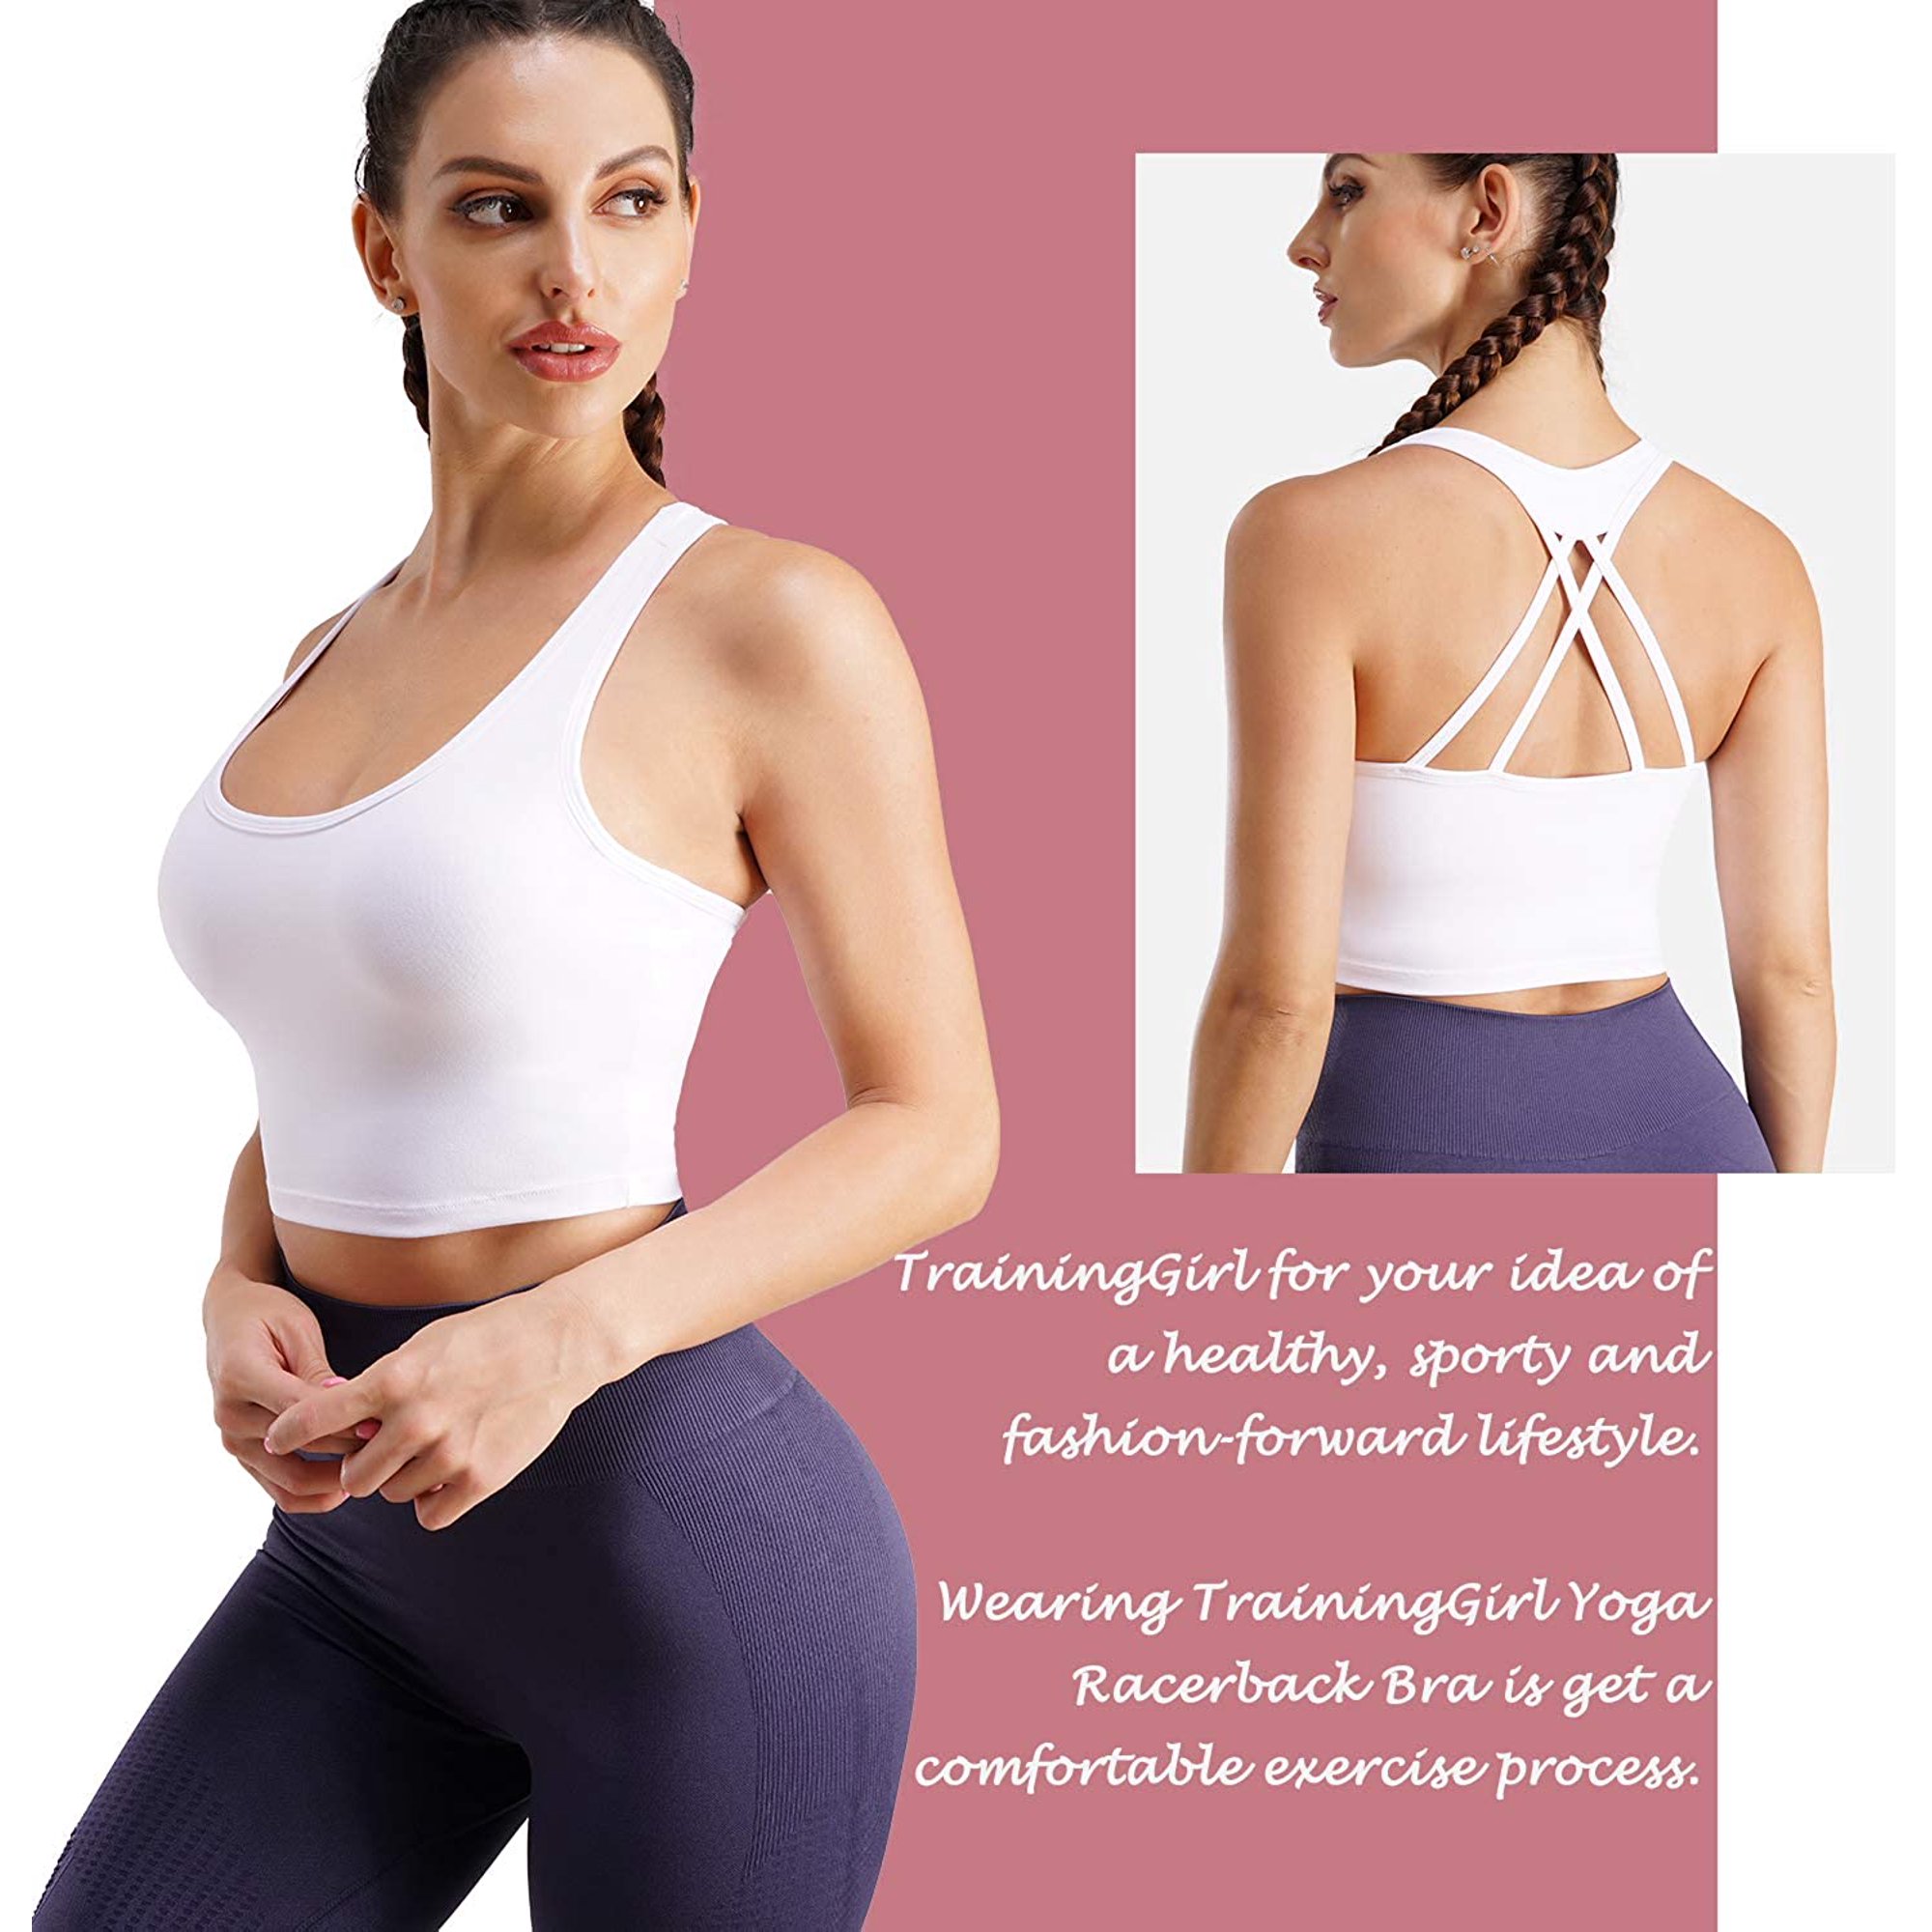  Womens Longline Sports Bra Wirefree Non-Removable Pads  Medium High Support Strappy Cross Back Workout Crop Top For Yoga Running  Fitness Gym